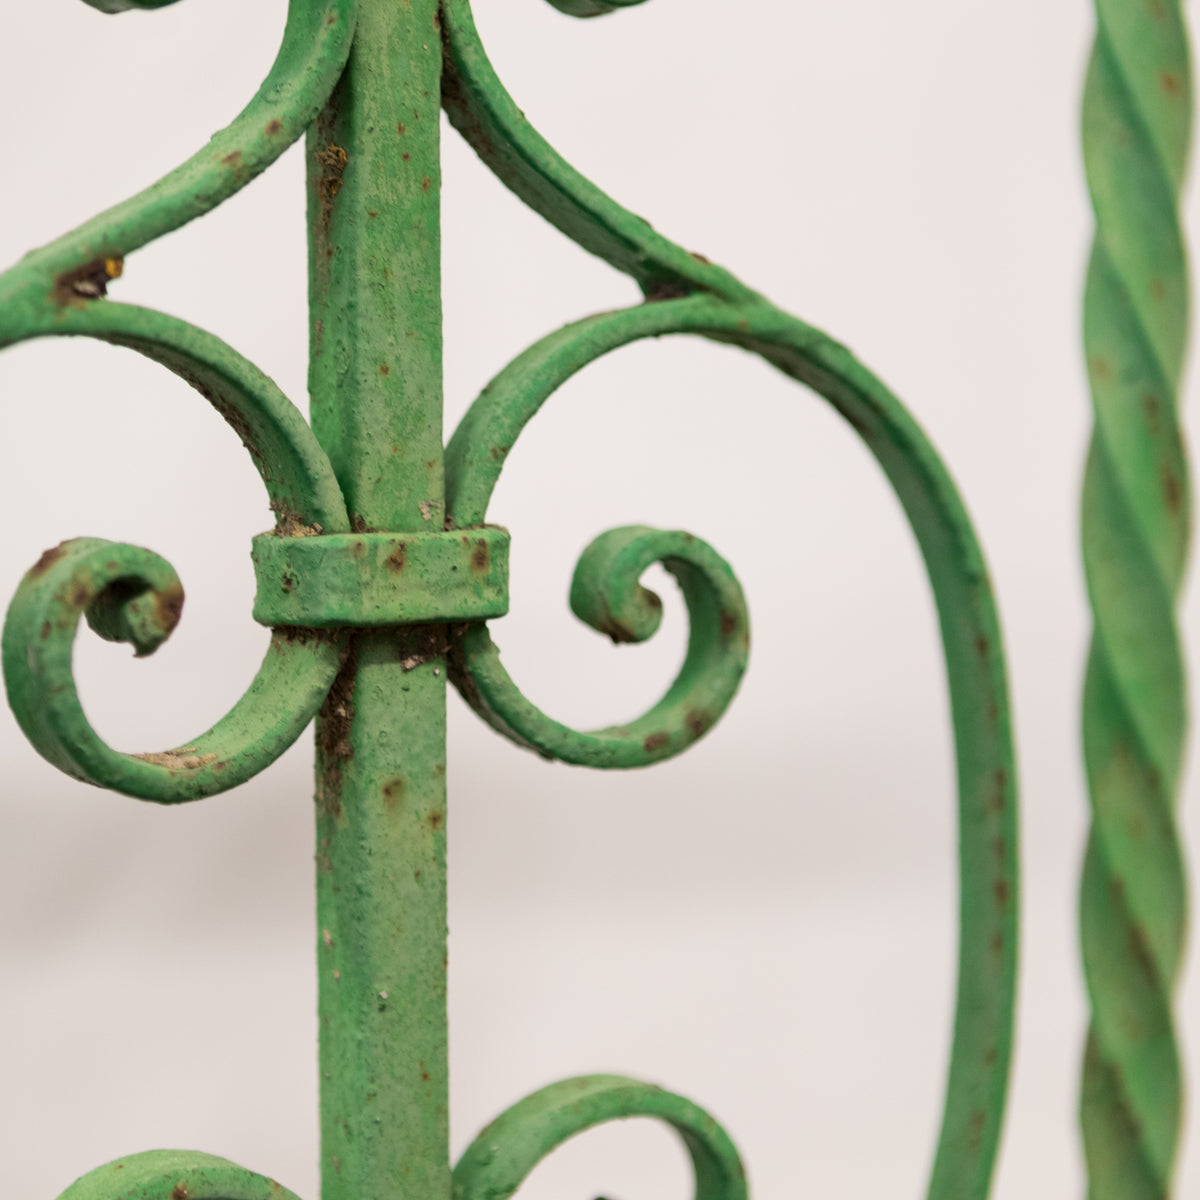 Pair of Ornate Antique Wrought Iron Spanish Window Guard  / Grills | The Architectural Forum